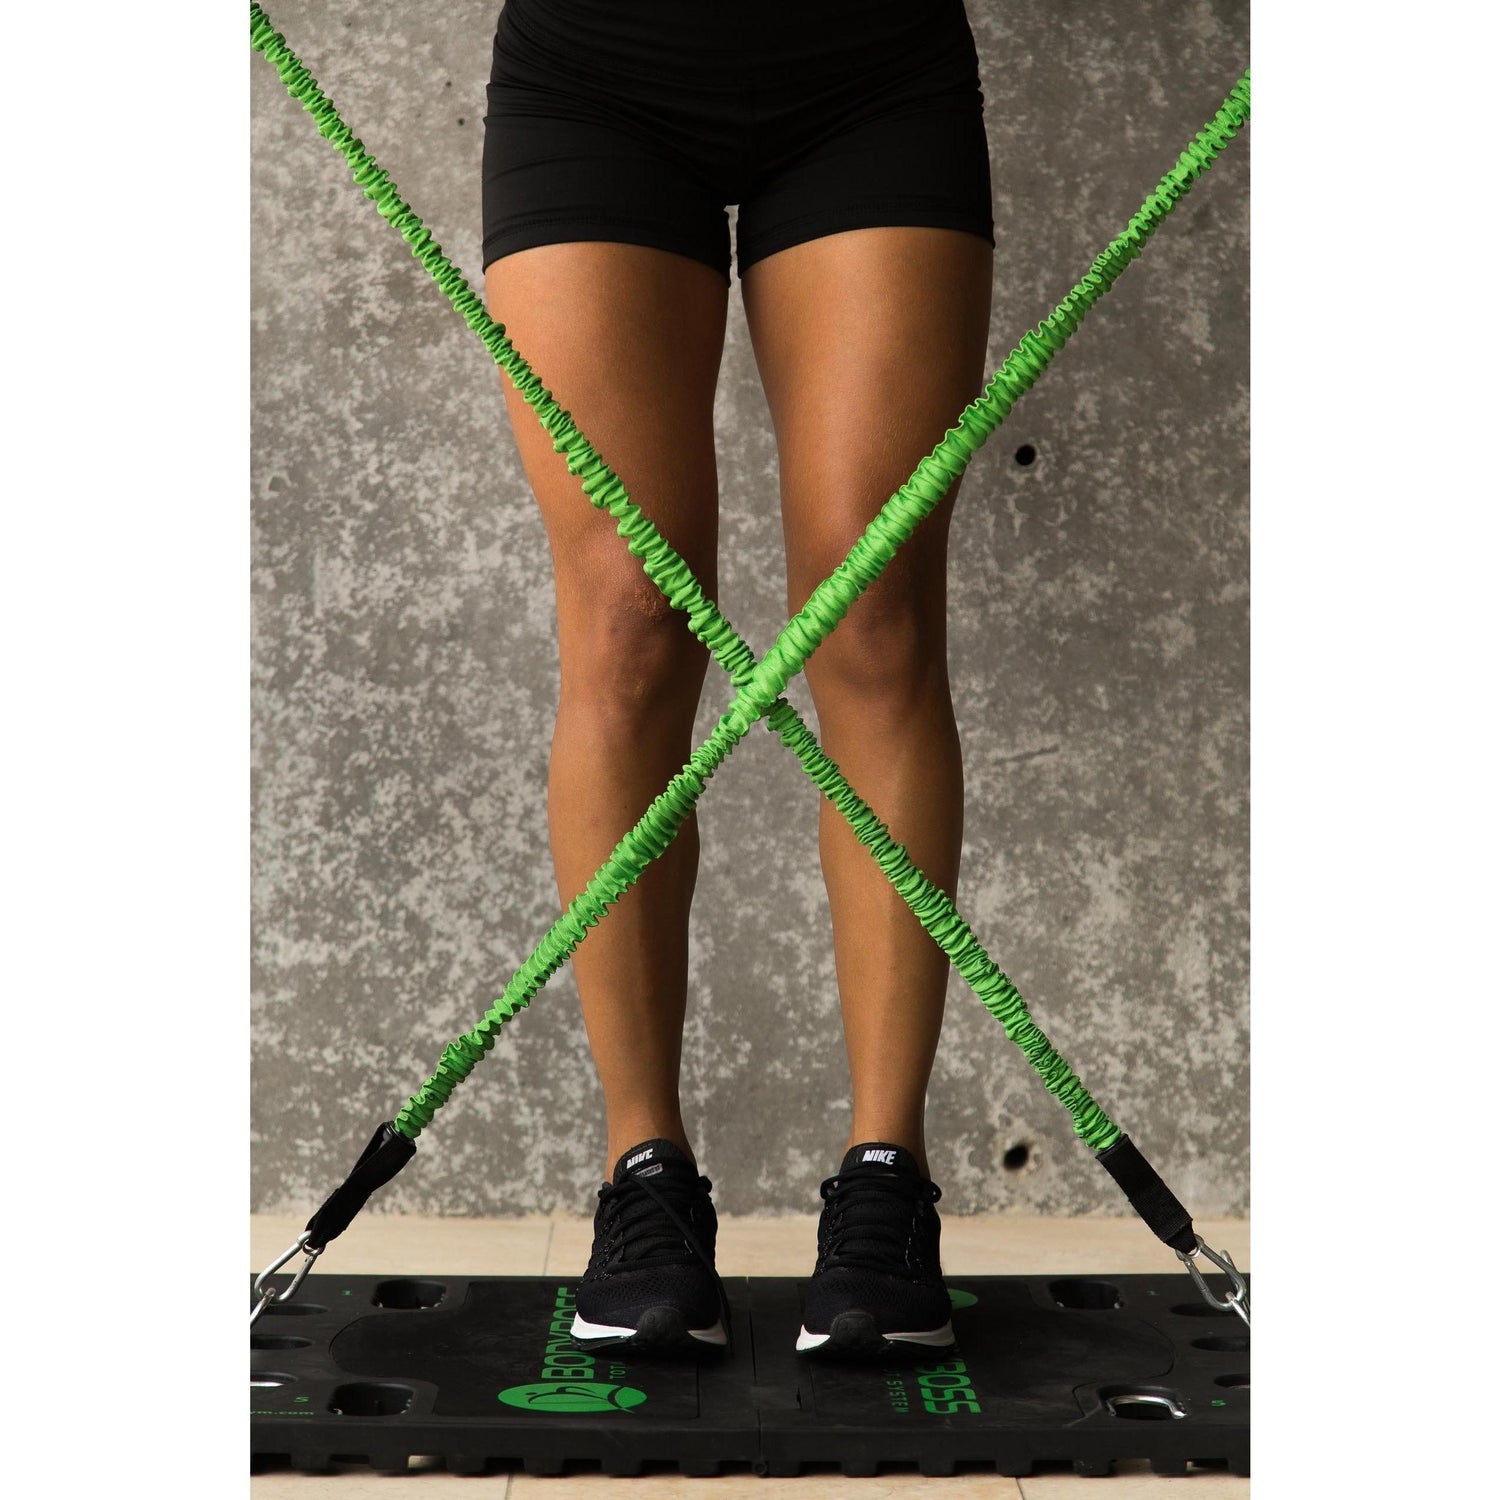 BodyBoss Resistance Bands - Custom Resistance Bands for Total Body Workouts